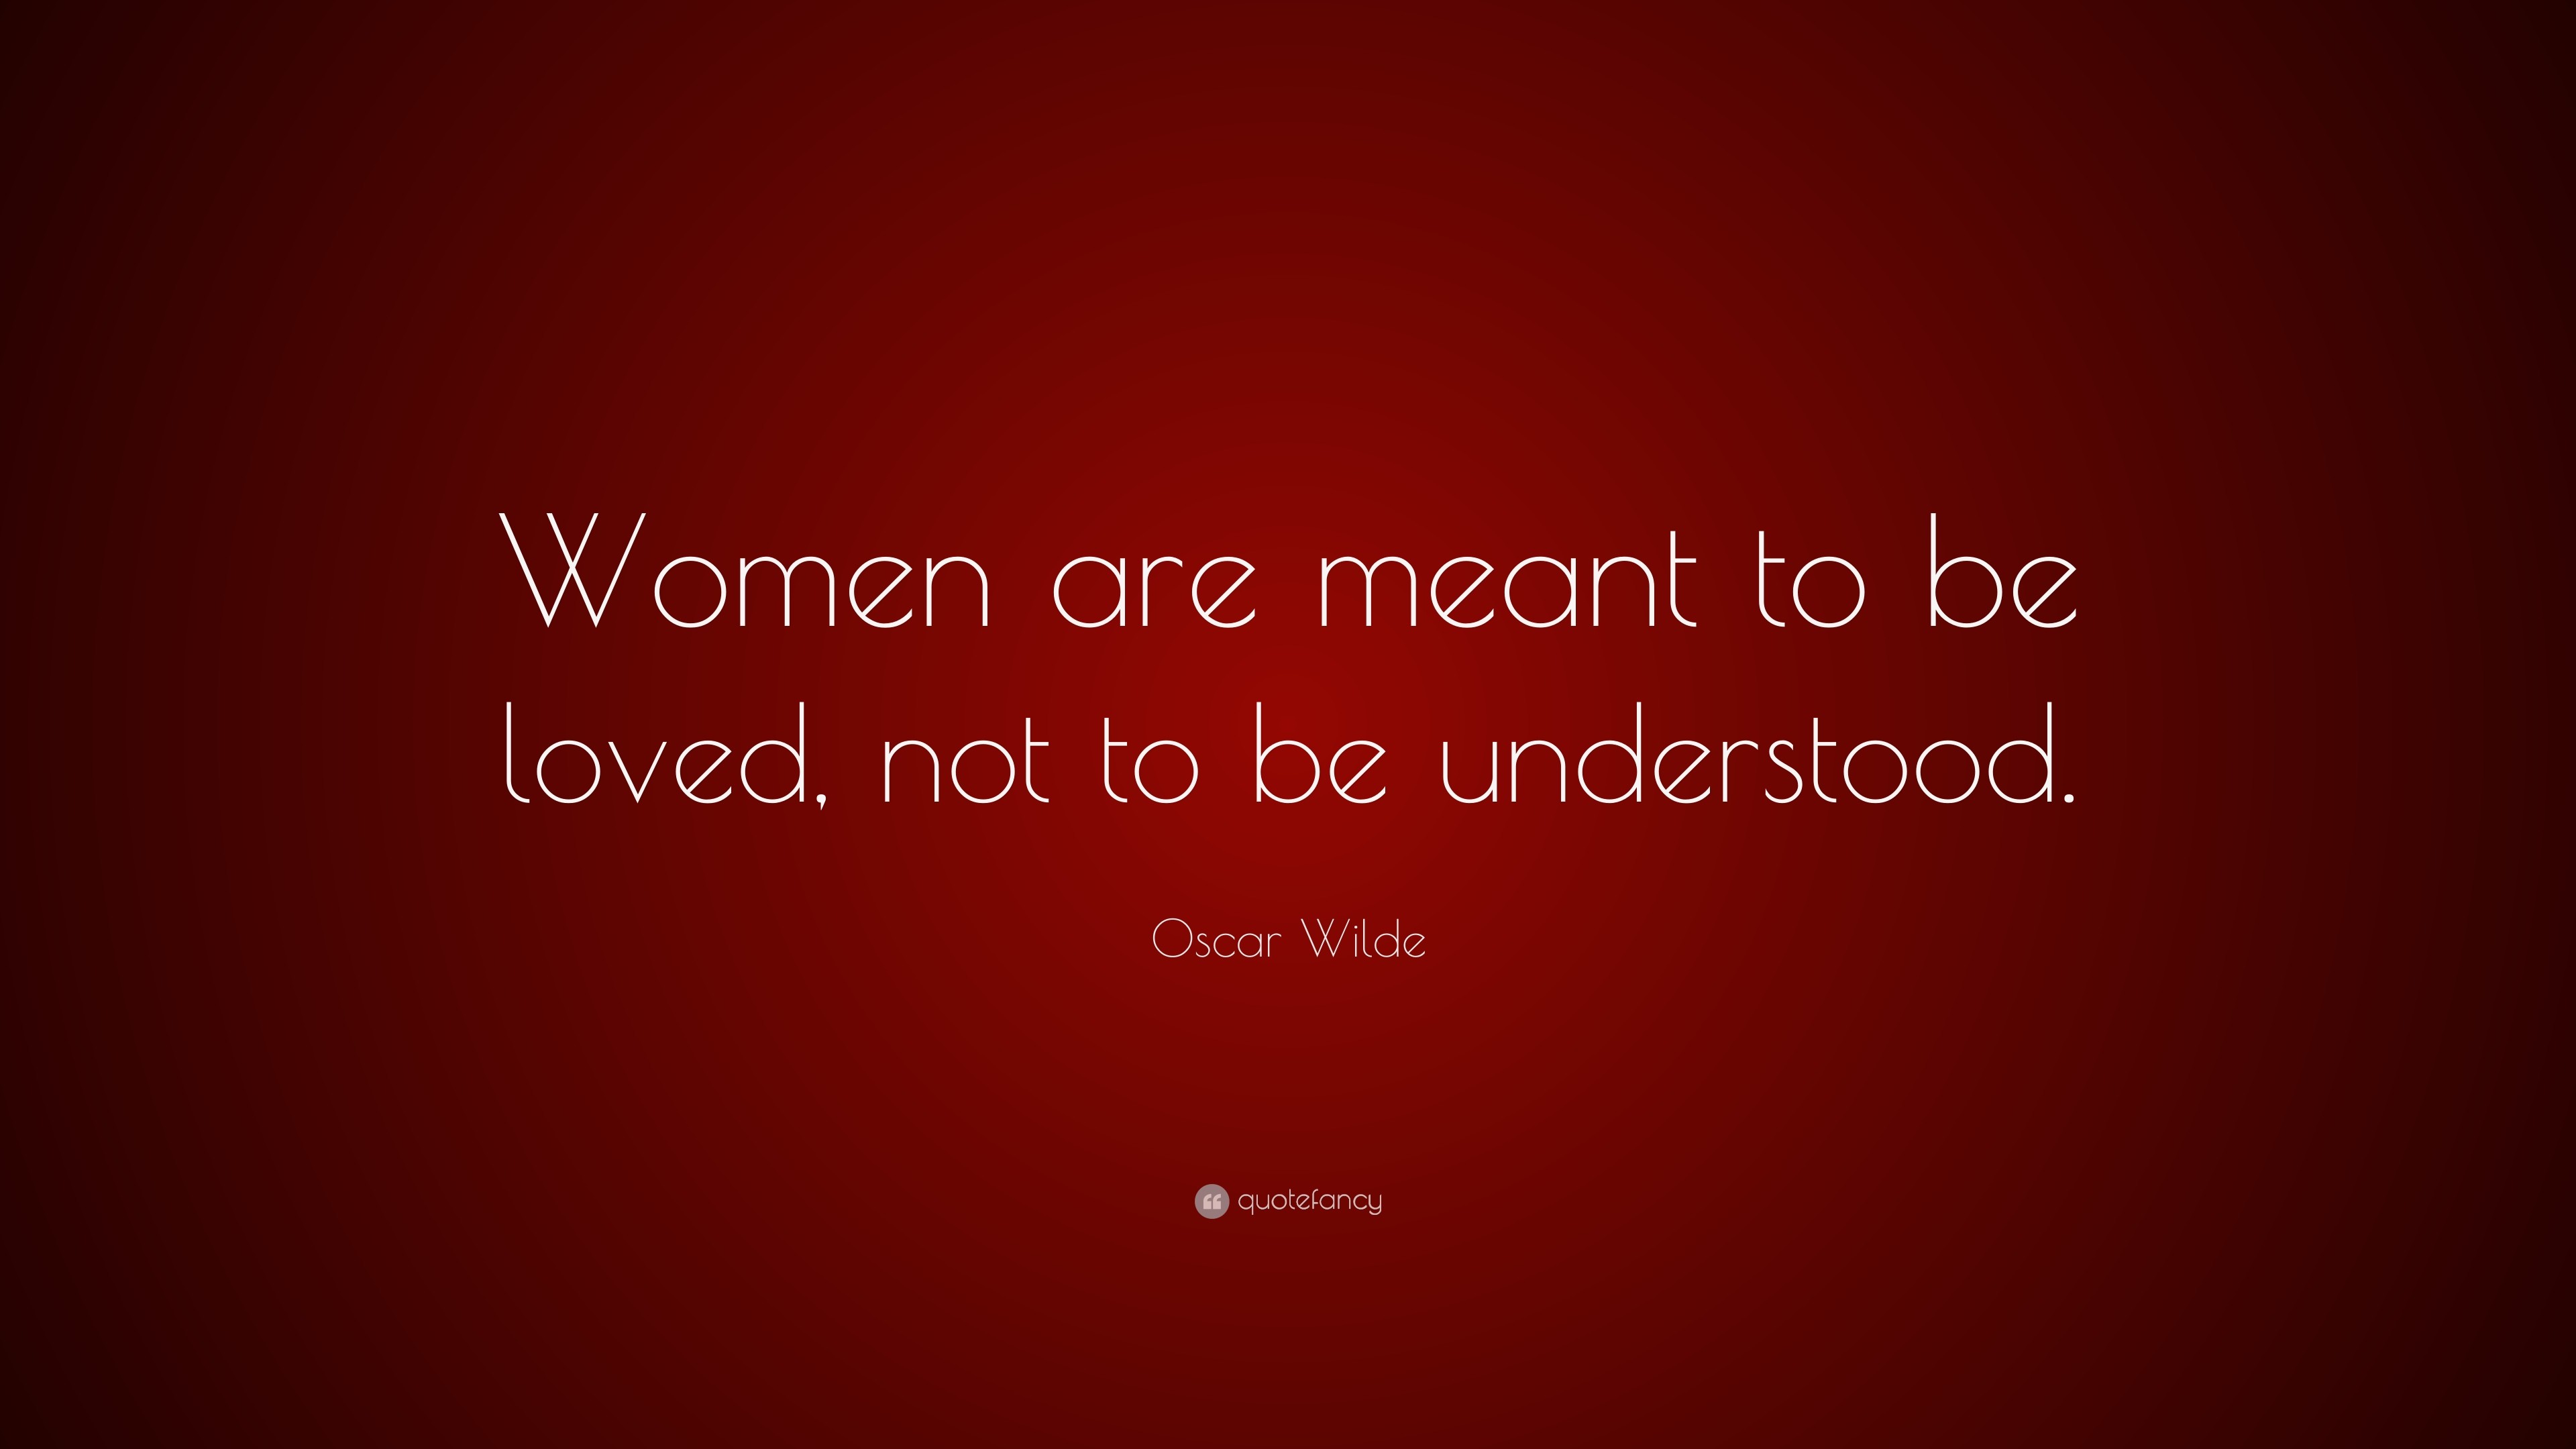 Oscar Wilde, Women, Quote, Text, Inspirational, Motivational, Red, Simple background, Red background Wallpaper